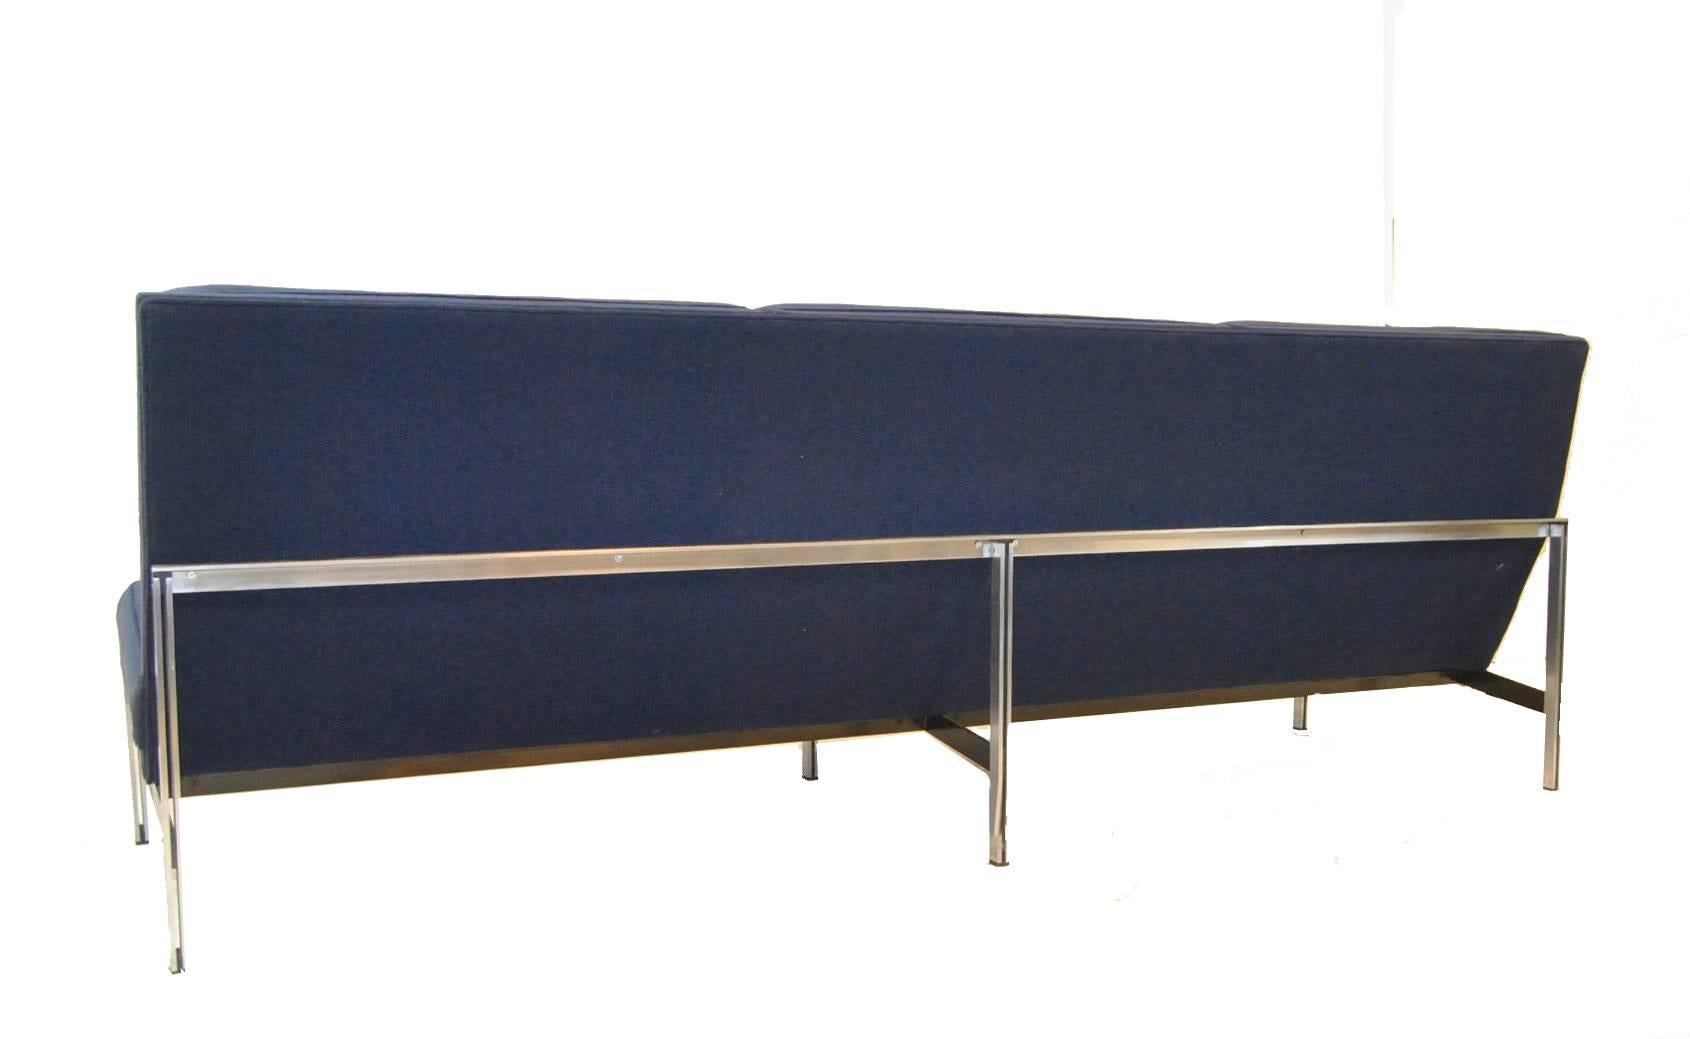 A Classic Mid-Century Modern Florence Knoll armless sofa. This is part of the Parallel series which features a chrome plated parallel base with black enamel supports. Sofa is upholstered in a blue cloth with tufted buttons on back and seat. Fabric